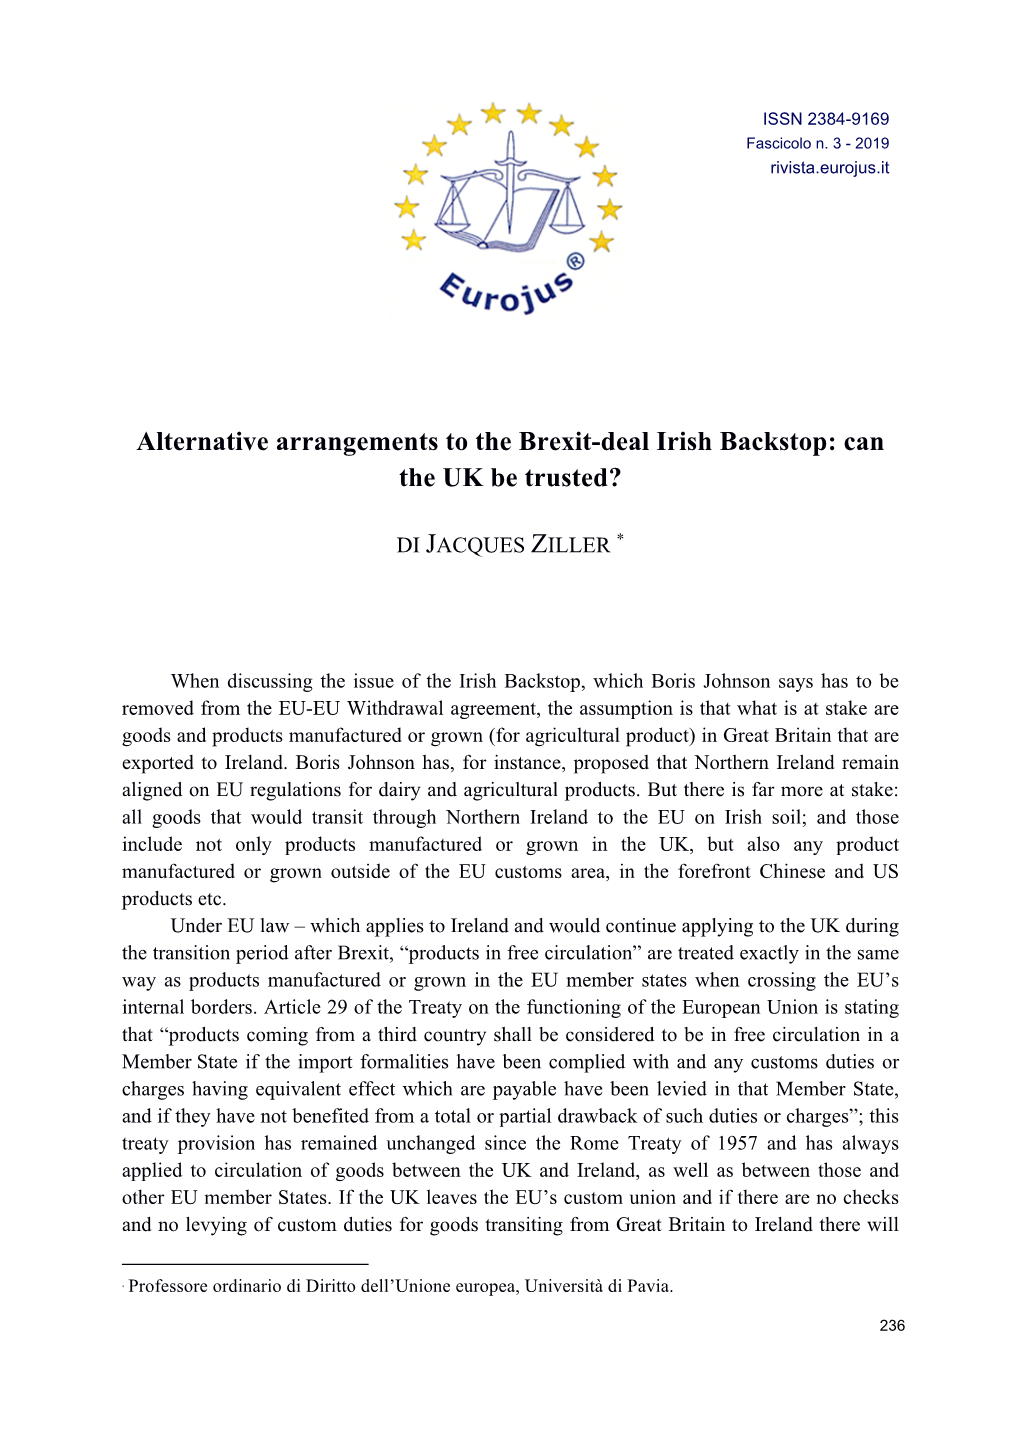 Alternative Arrangements to the Brexit-Deal Irish Backstop: Can the UK Be Trusted?